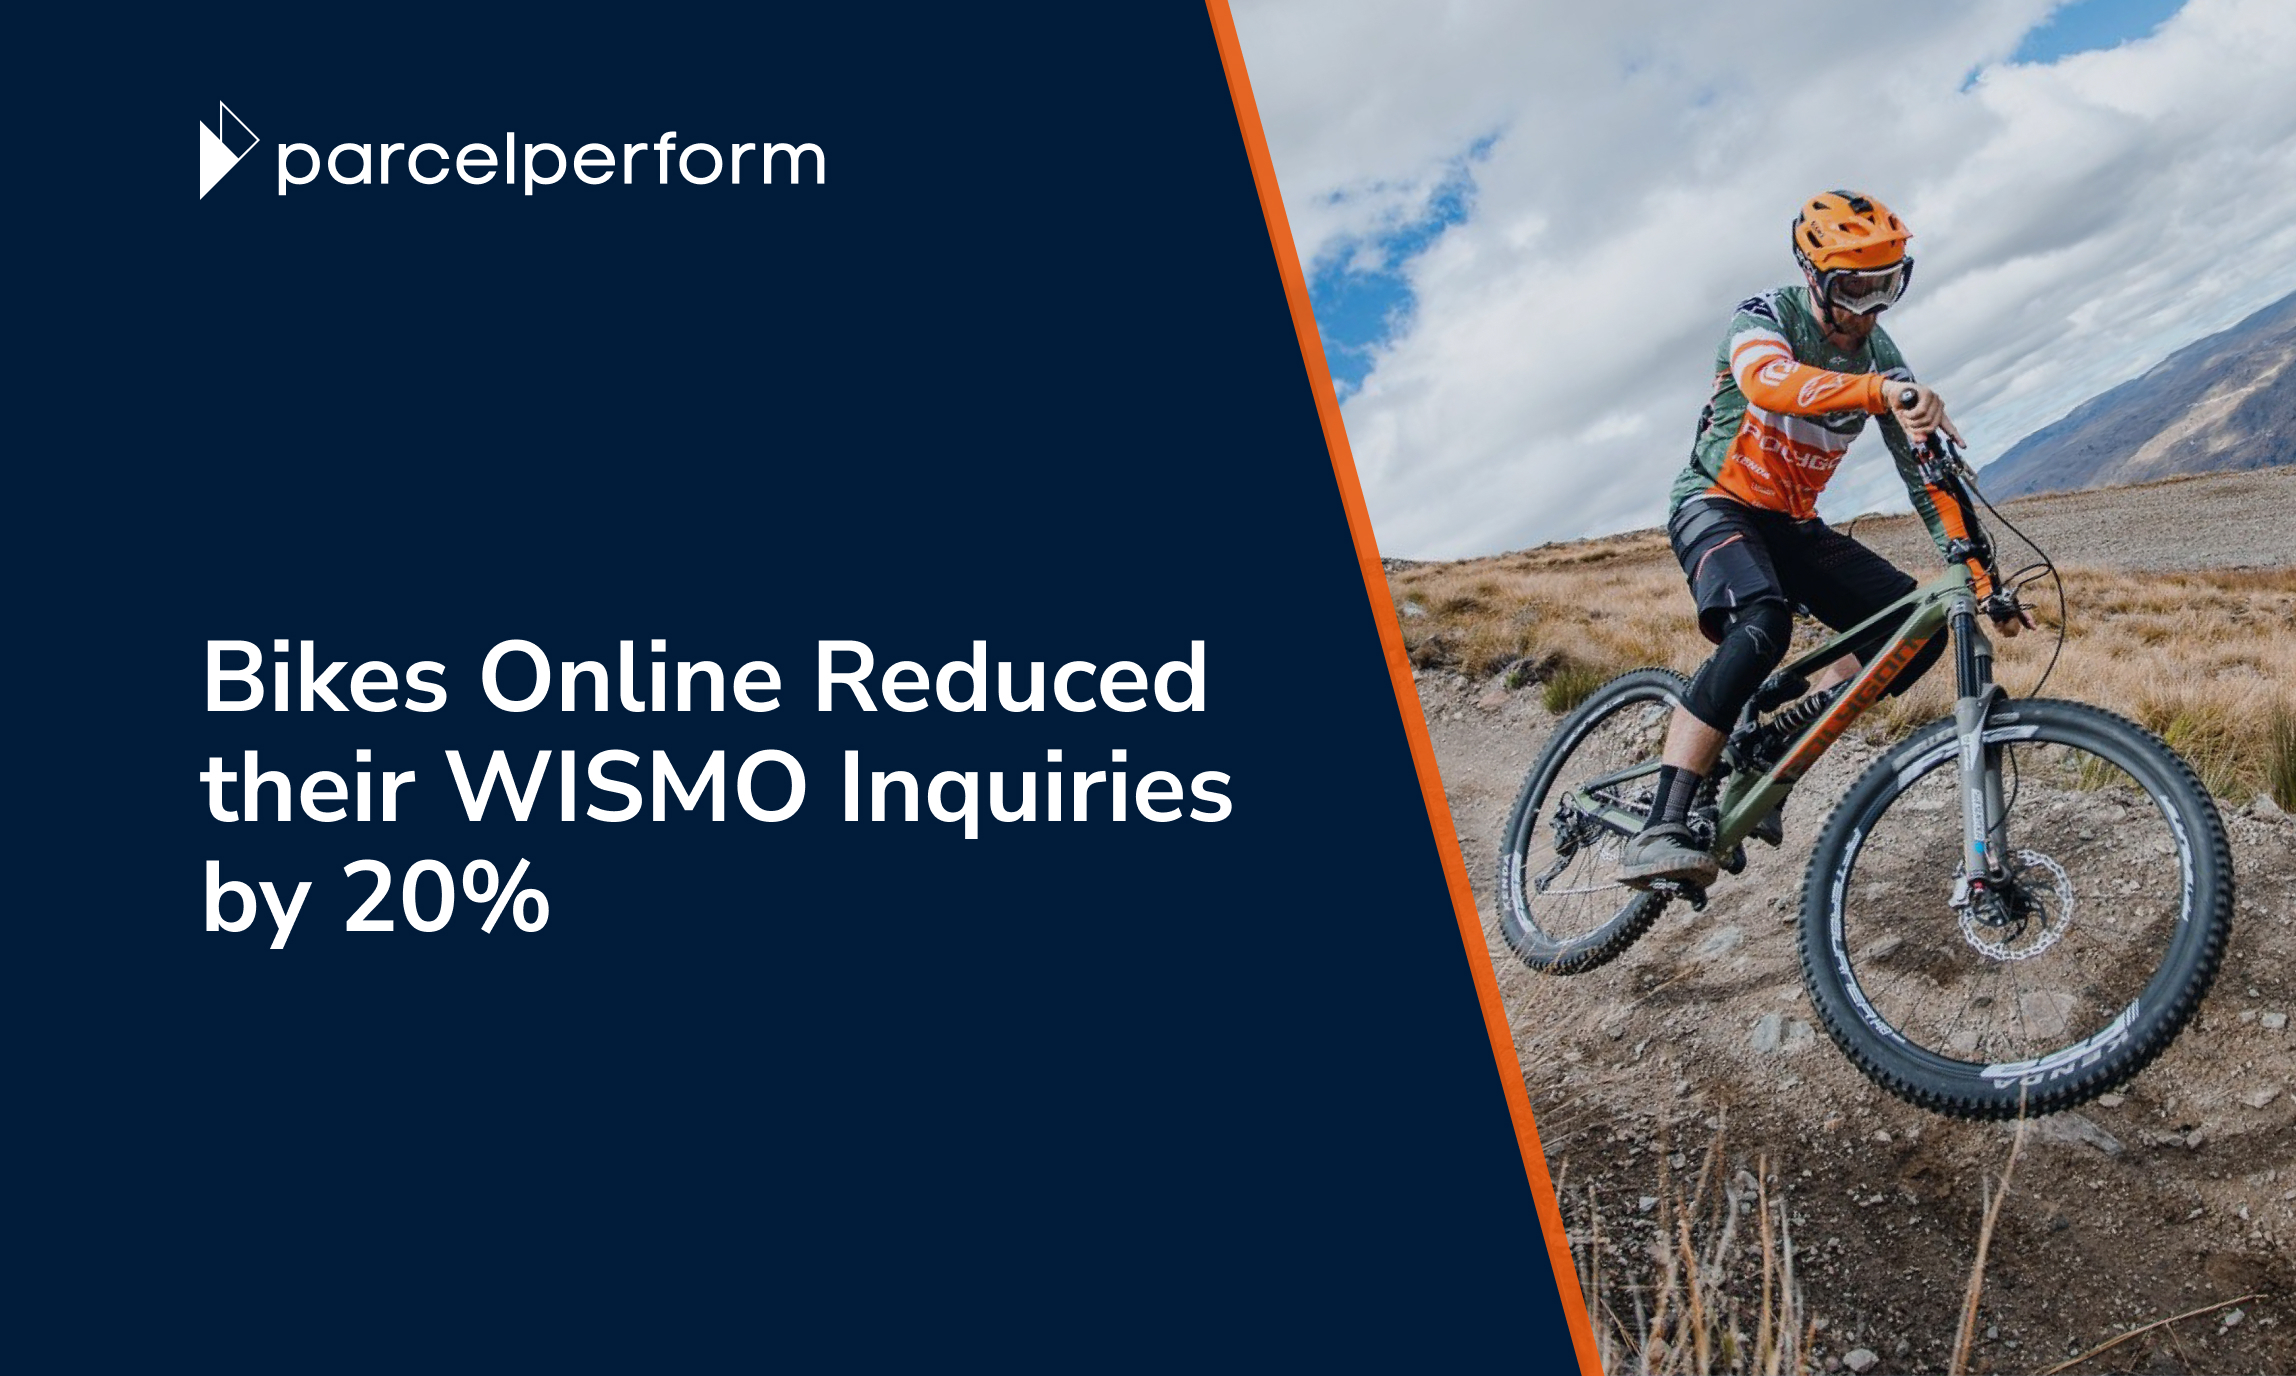 Bikes Online Reduced their WISMO Inquiries by 20%